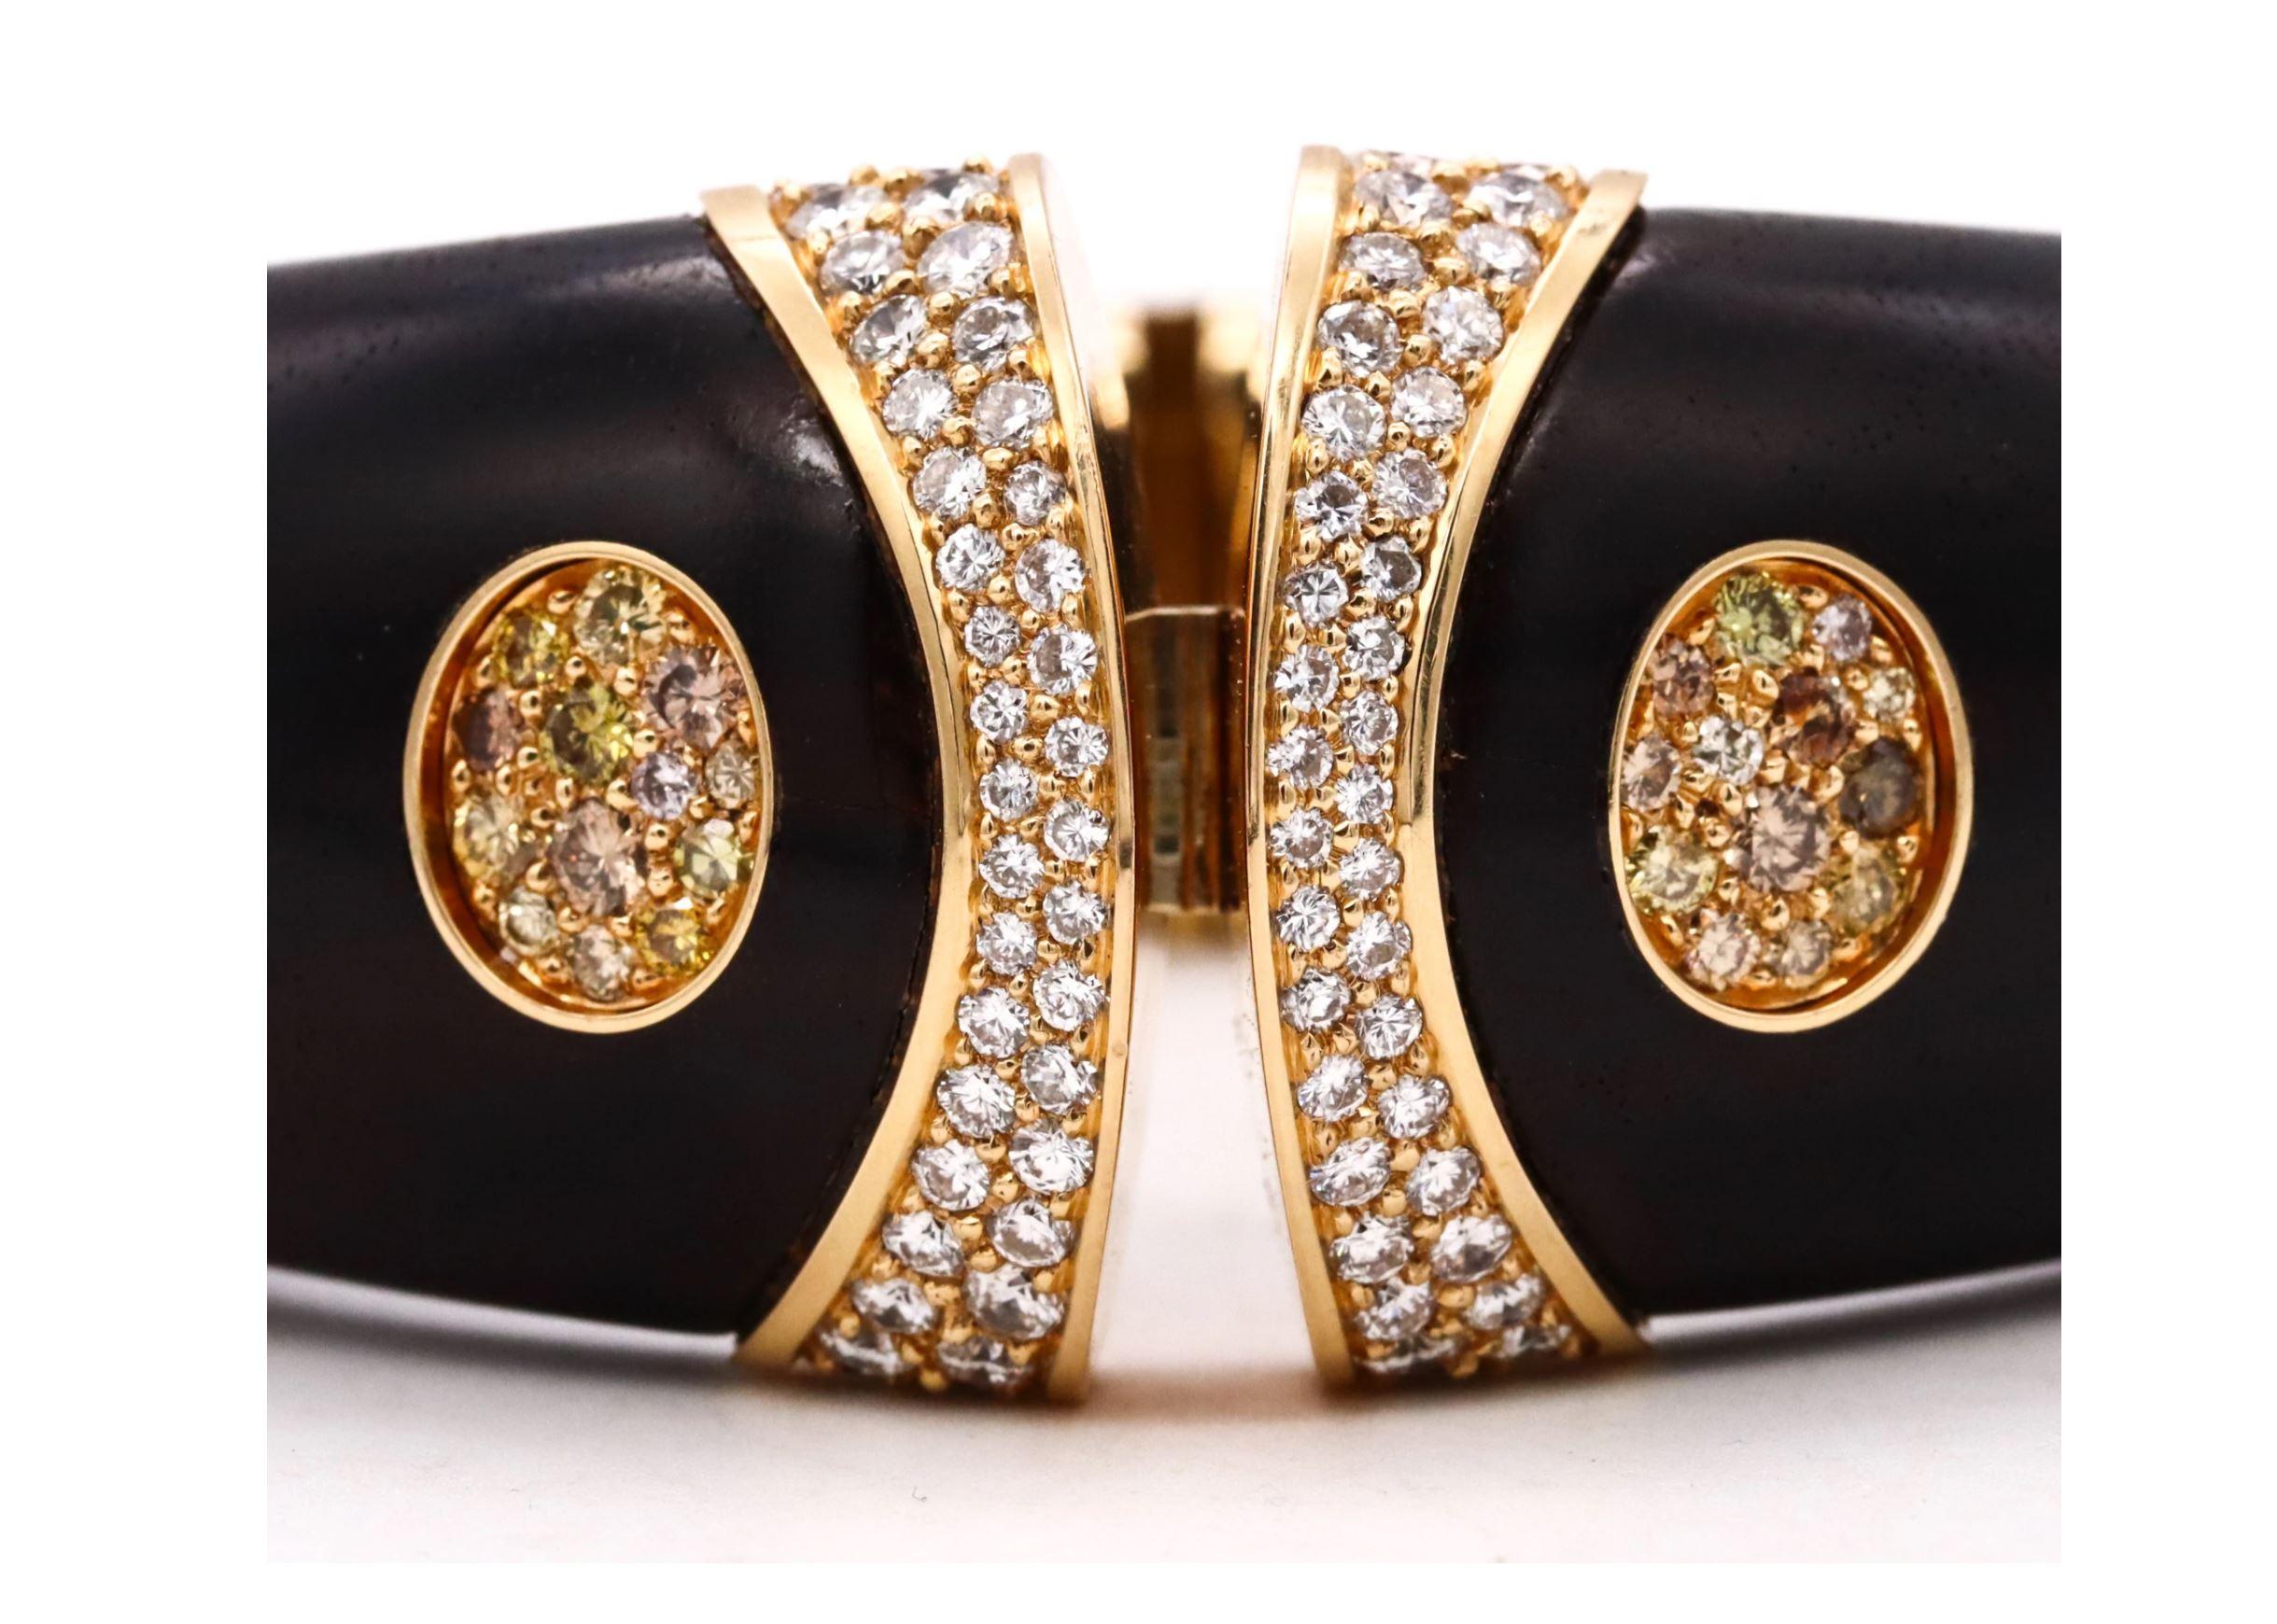 Beautiful statement piece made in Zurich Switzerland, back in the 1970's. This is a one-of-a-kind bracelet carefully crafted by Paul Binder itself in solid 18 karats of polished yellow gold and is suited with a hinged tension mechanism with an